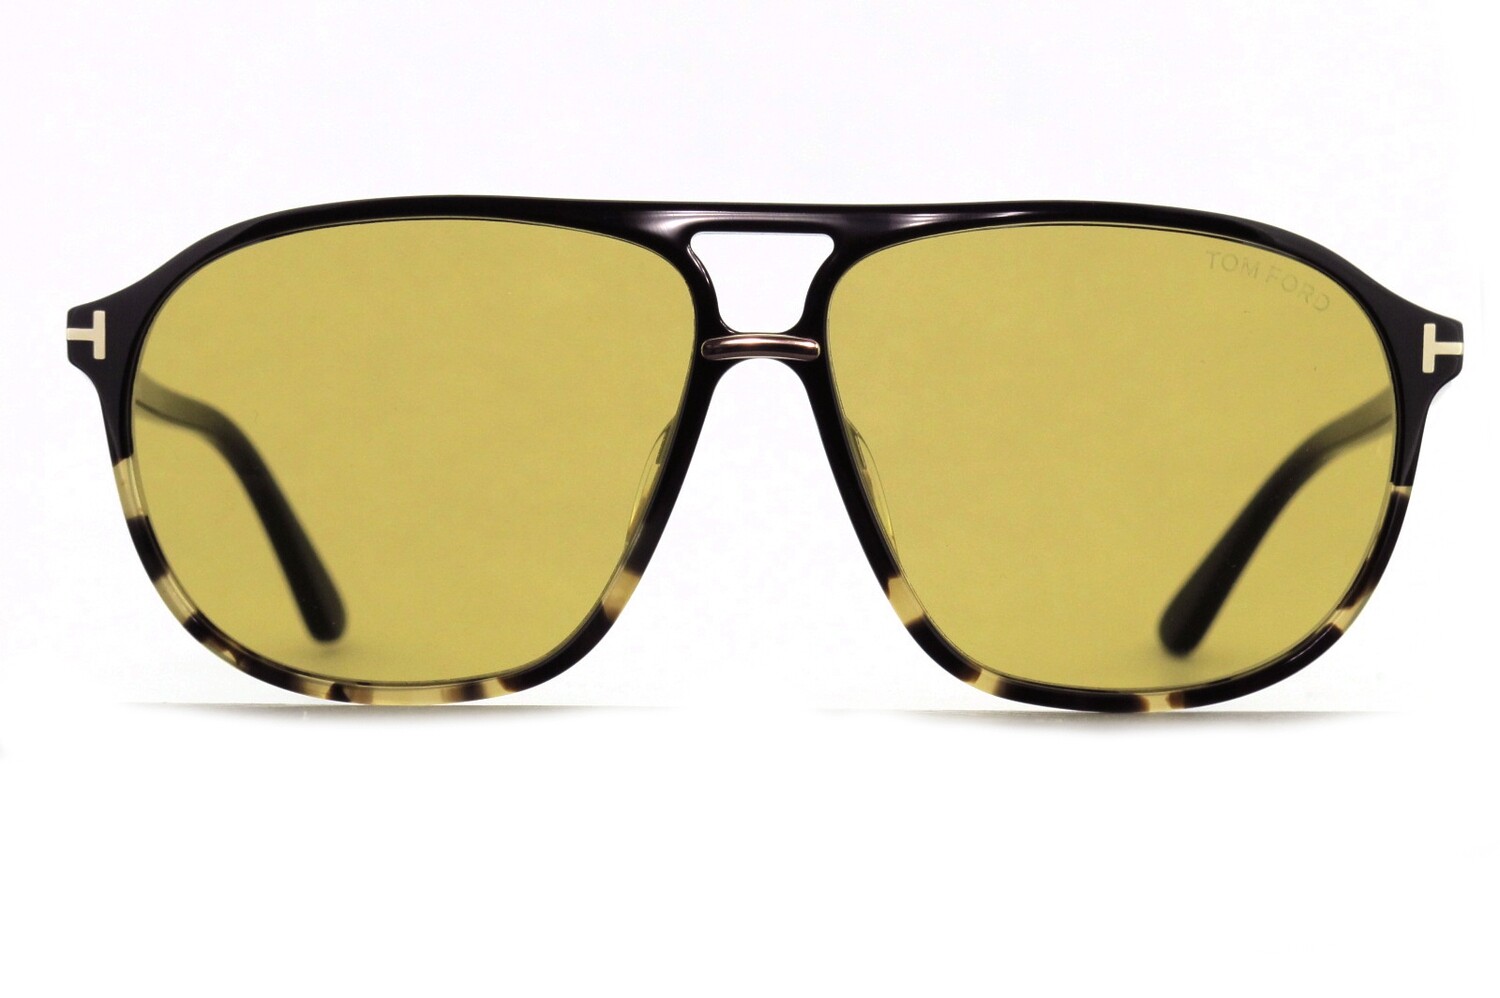 Bruce TF1026 by Tom Ford